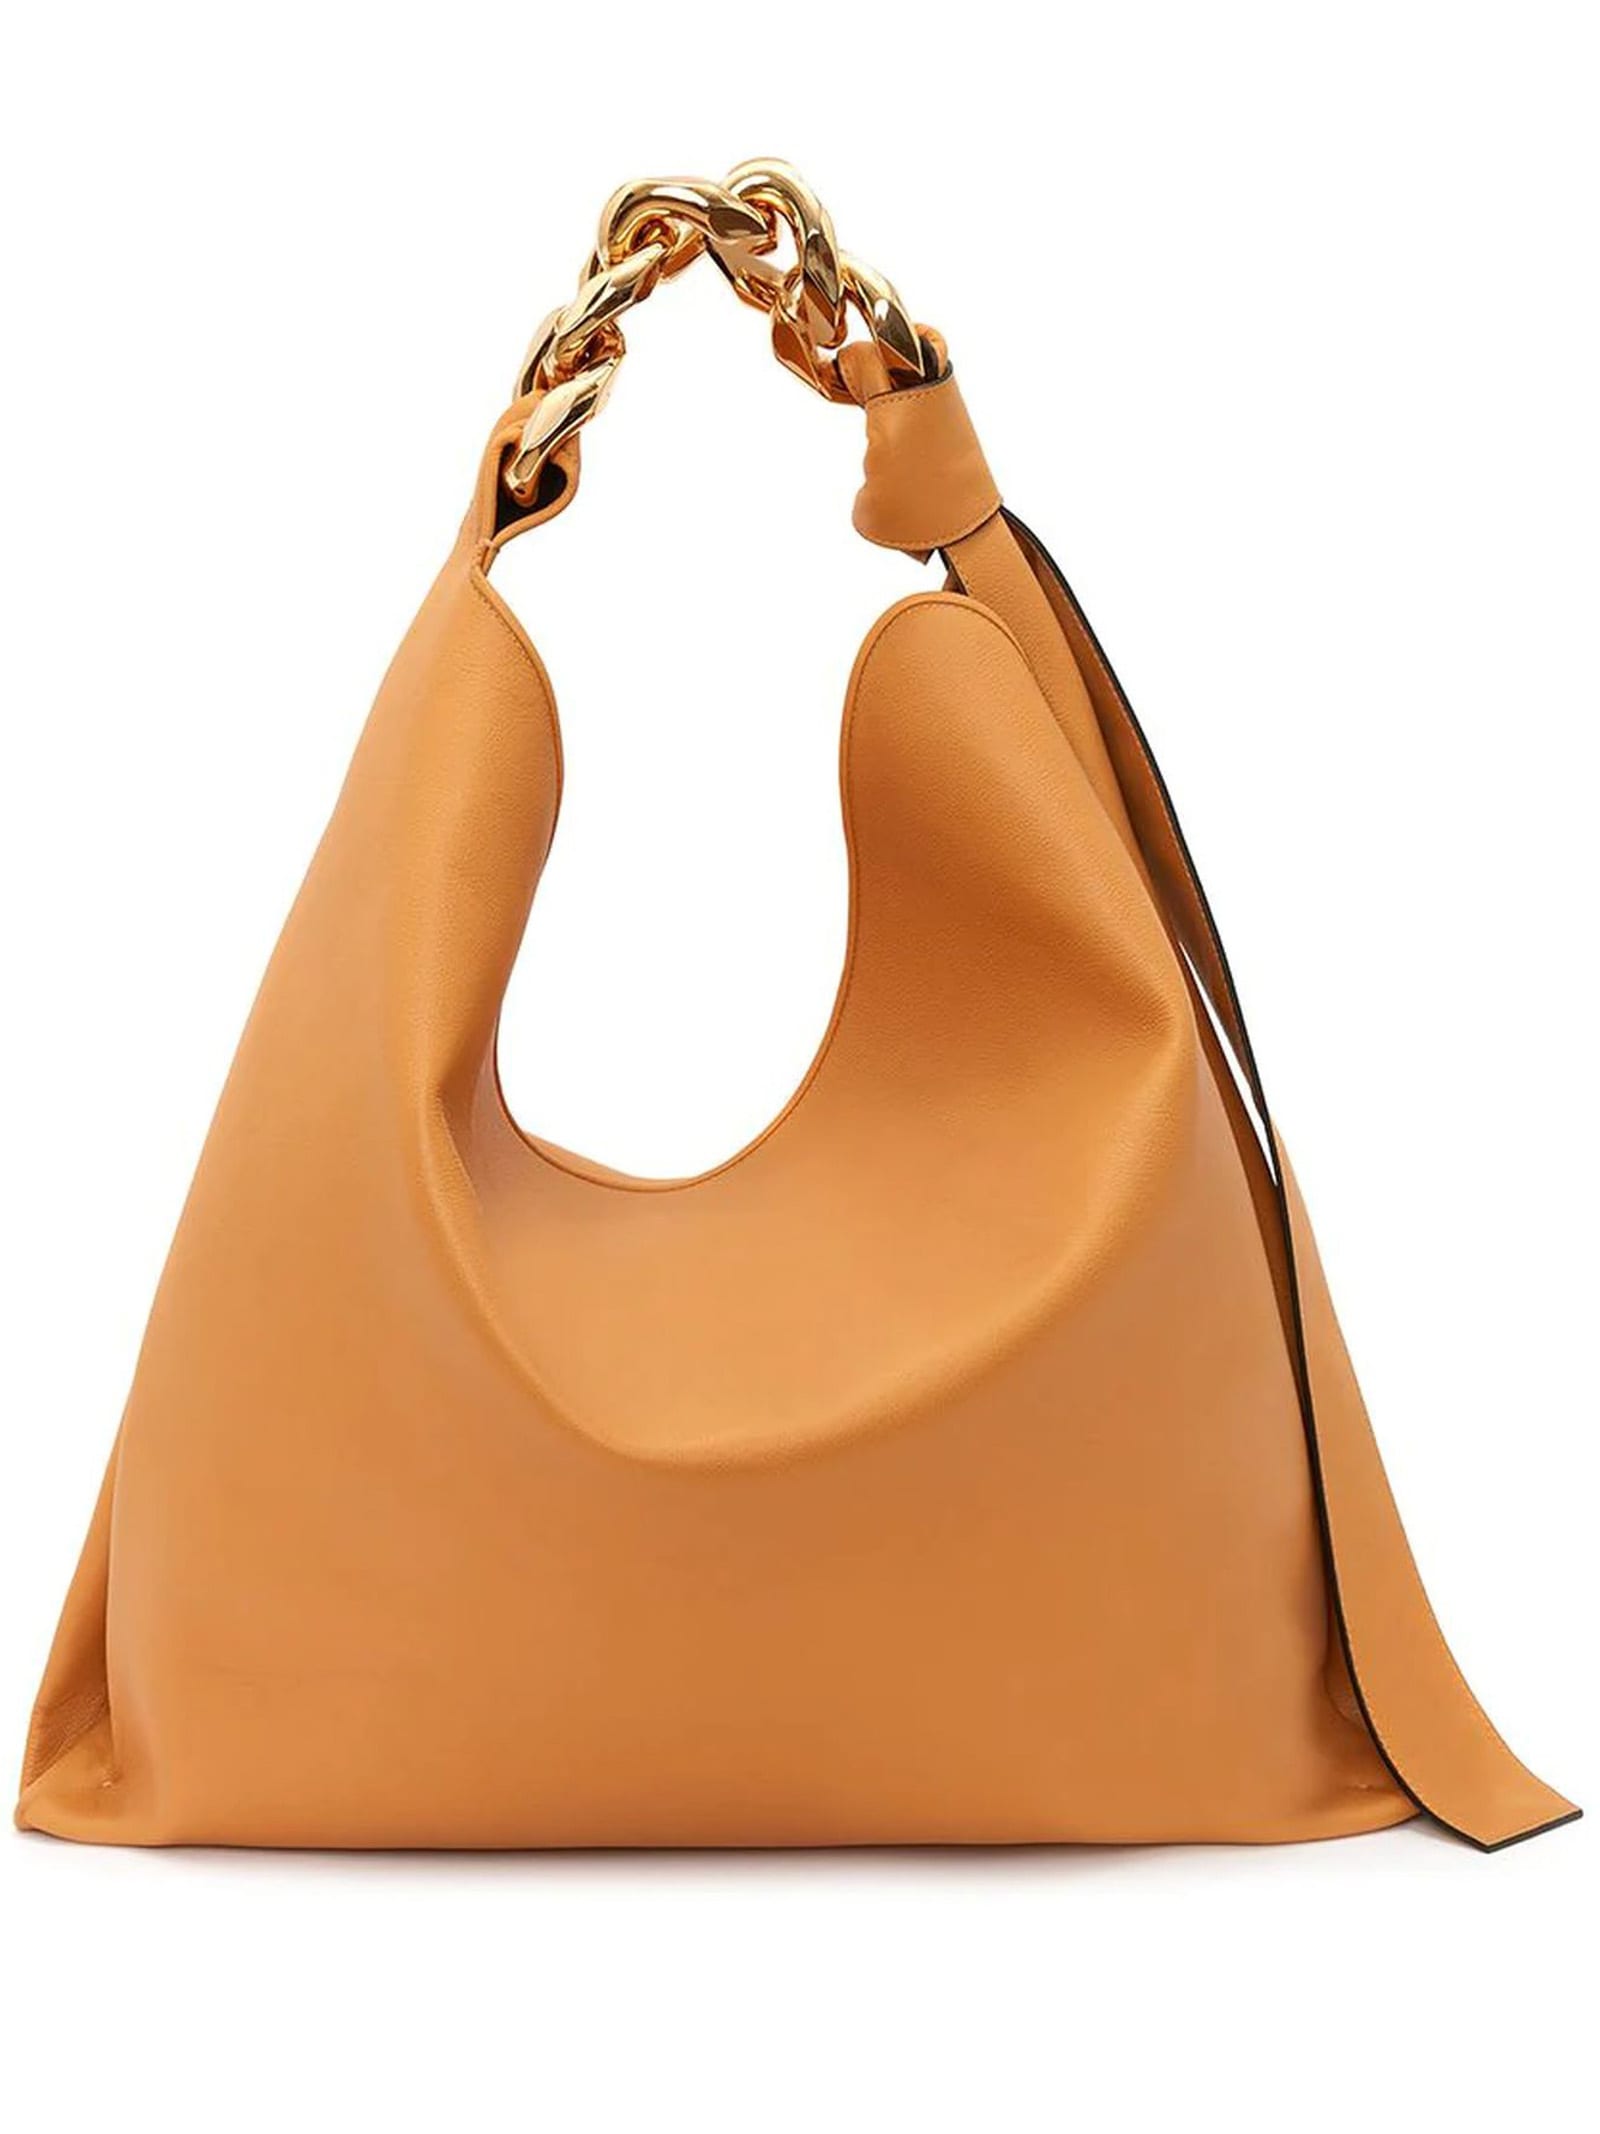 J.W. Anderson Large Chain Hobo